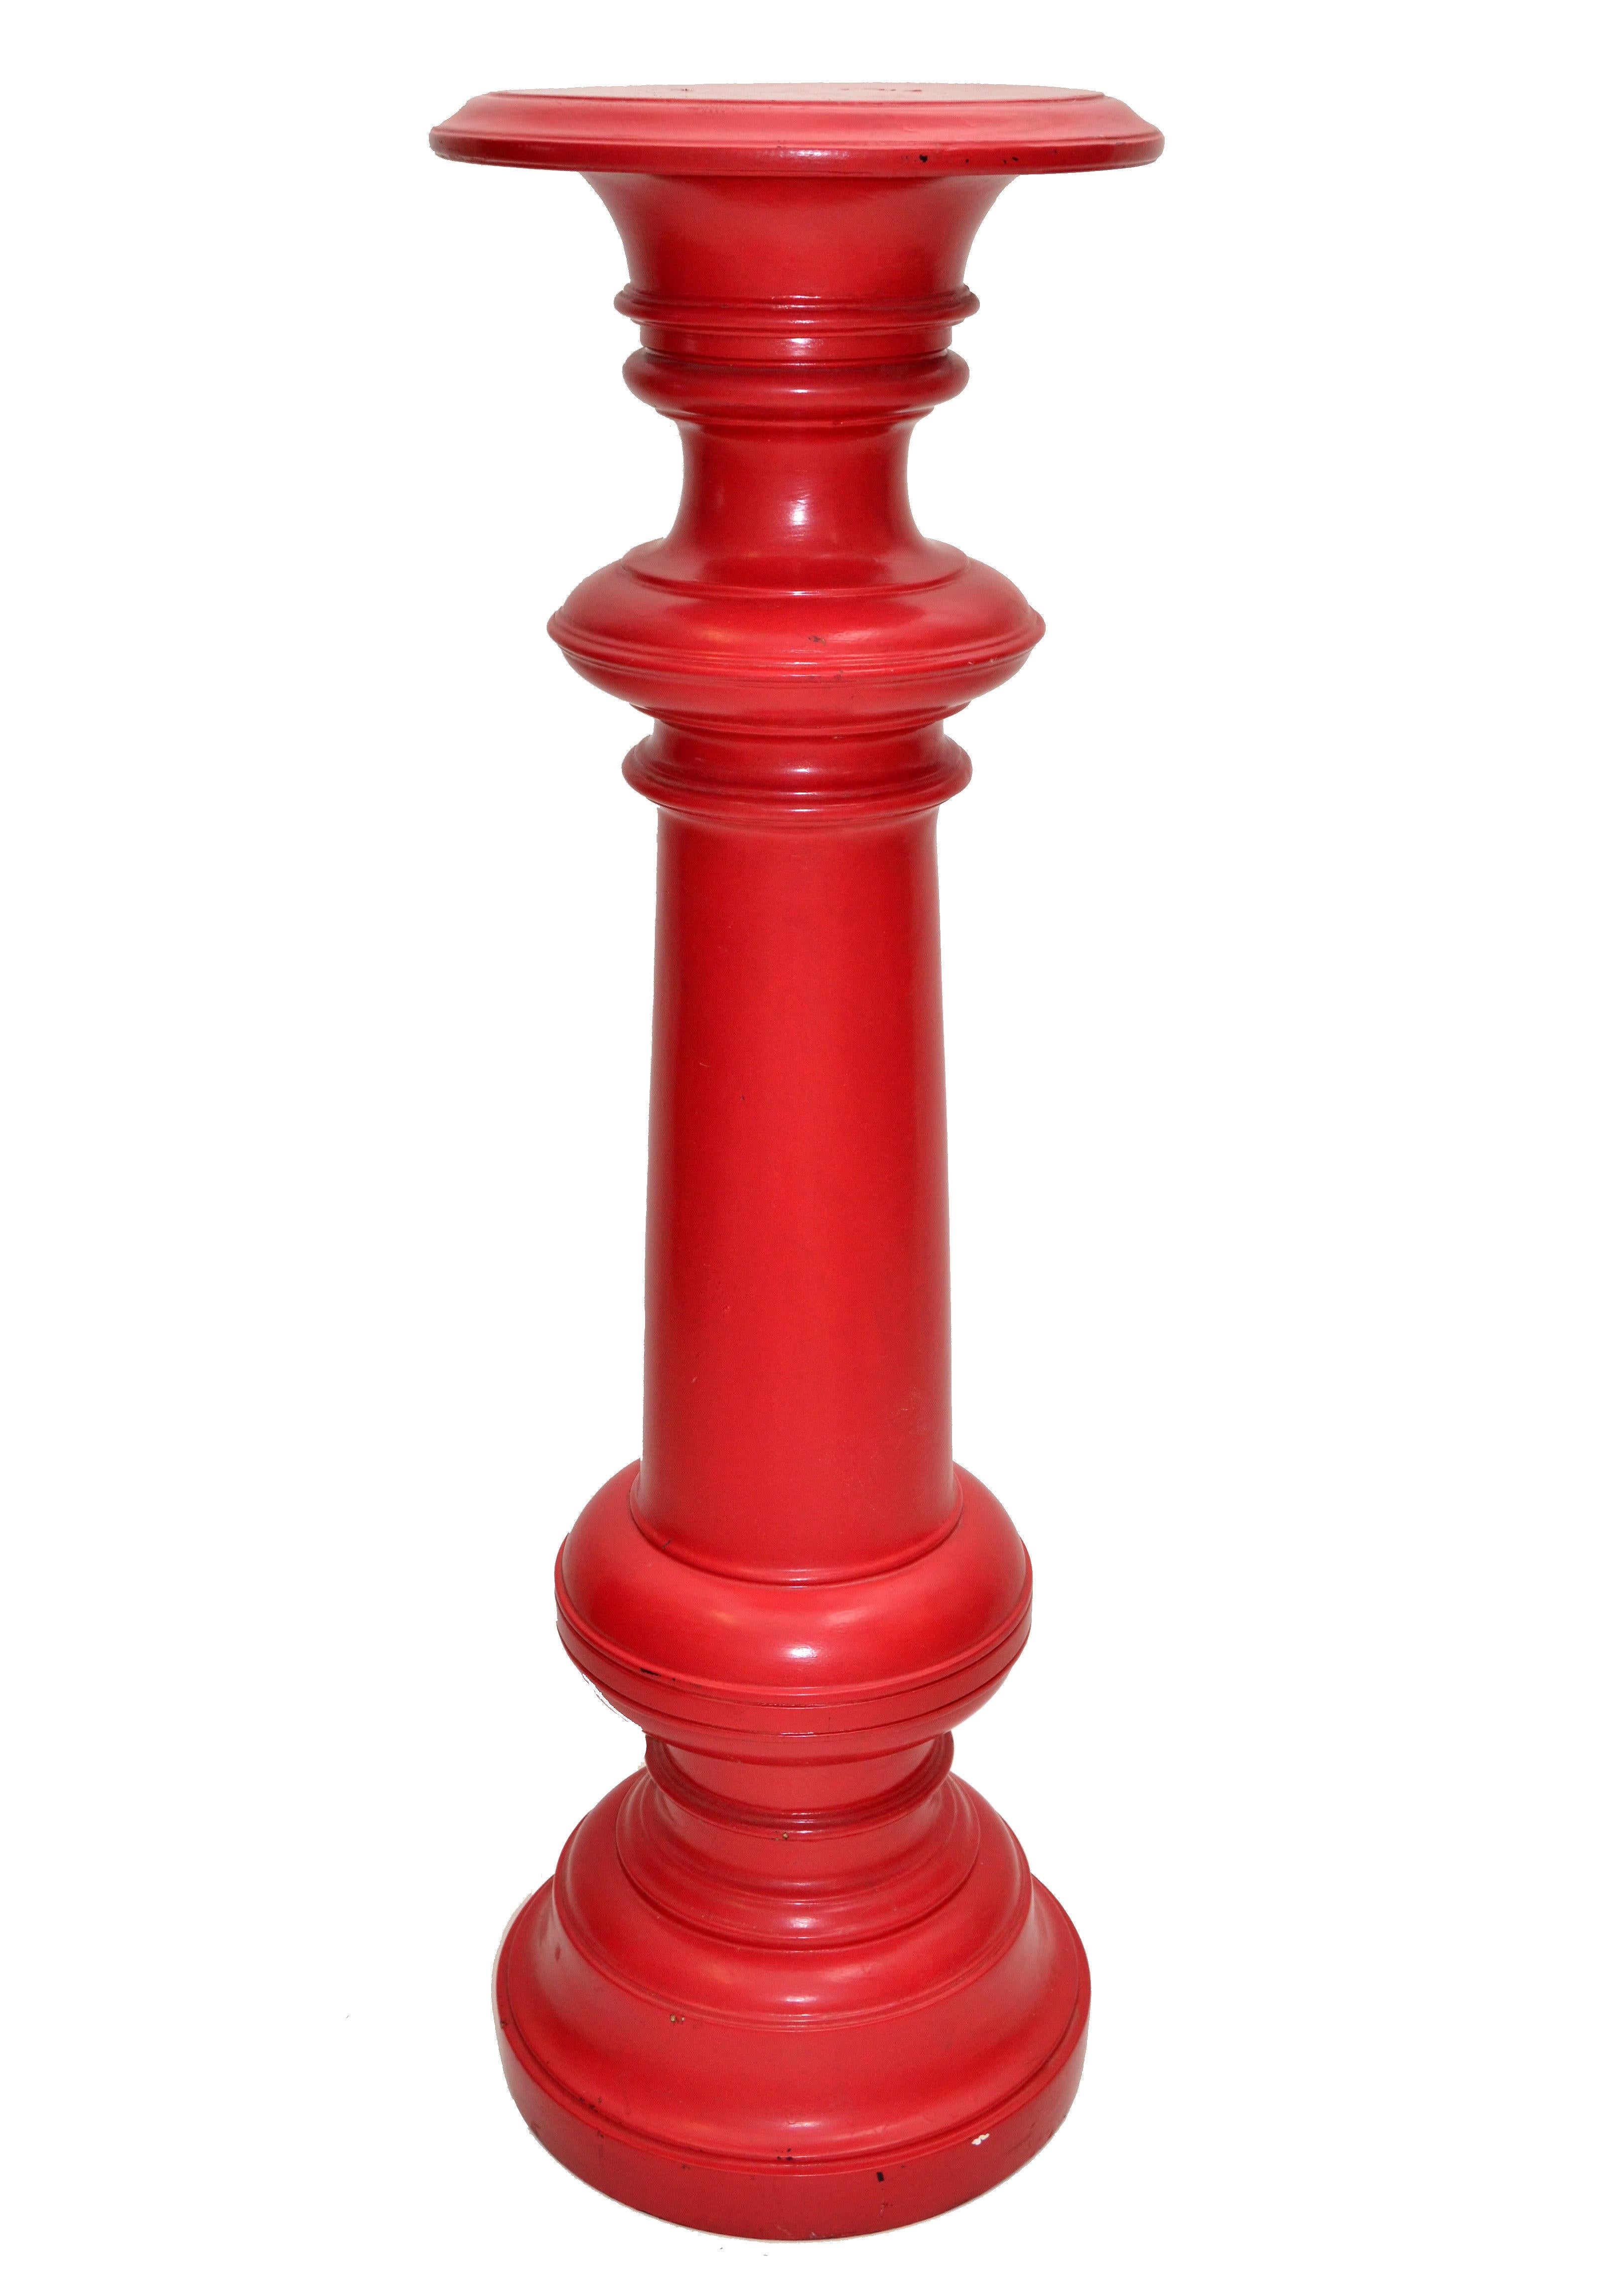 Tall Mid-Century Modern Turned Wood Red Finish Plant Stand Sculpture Pedestal For Sale 1